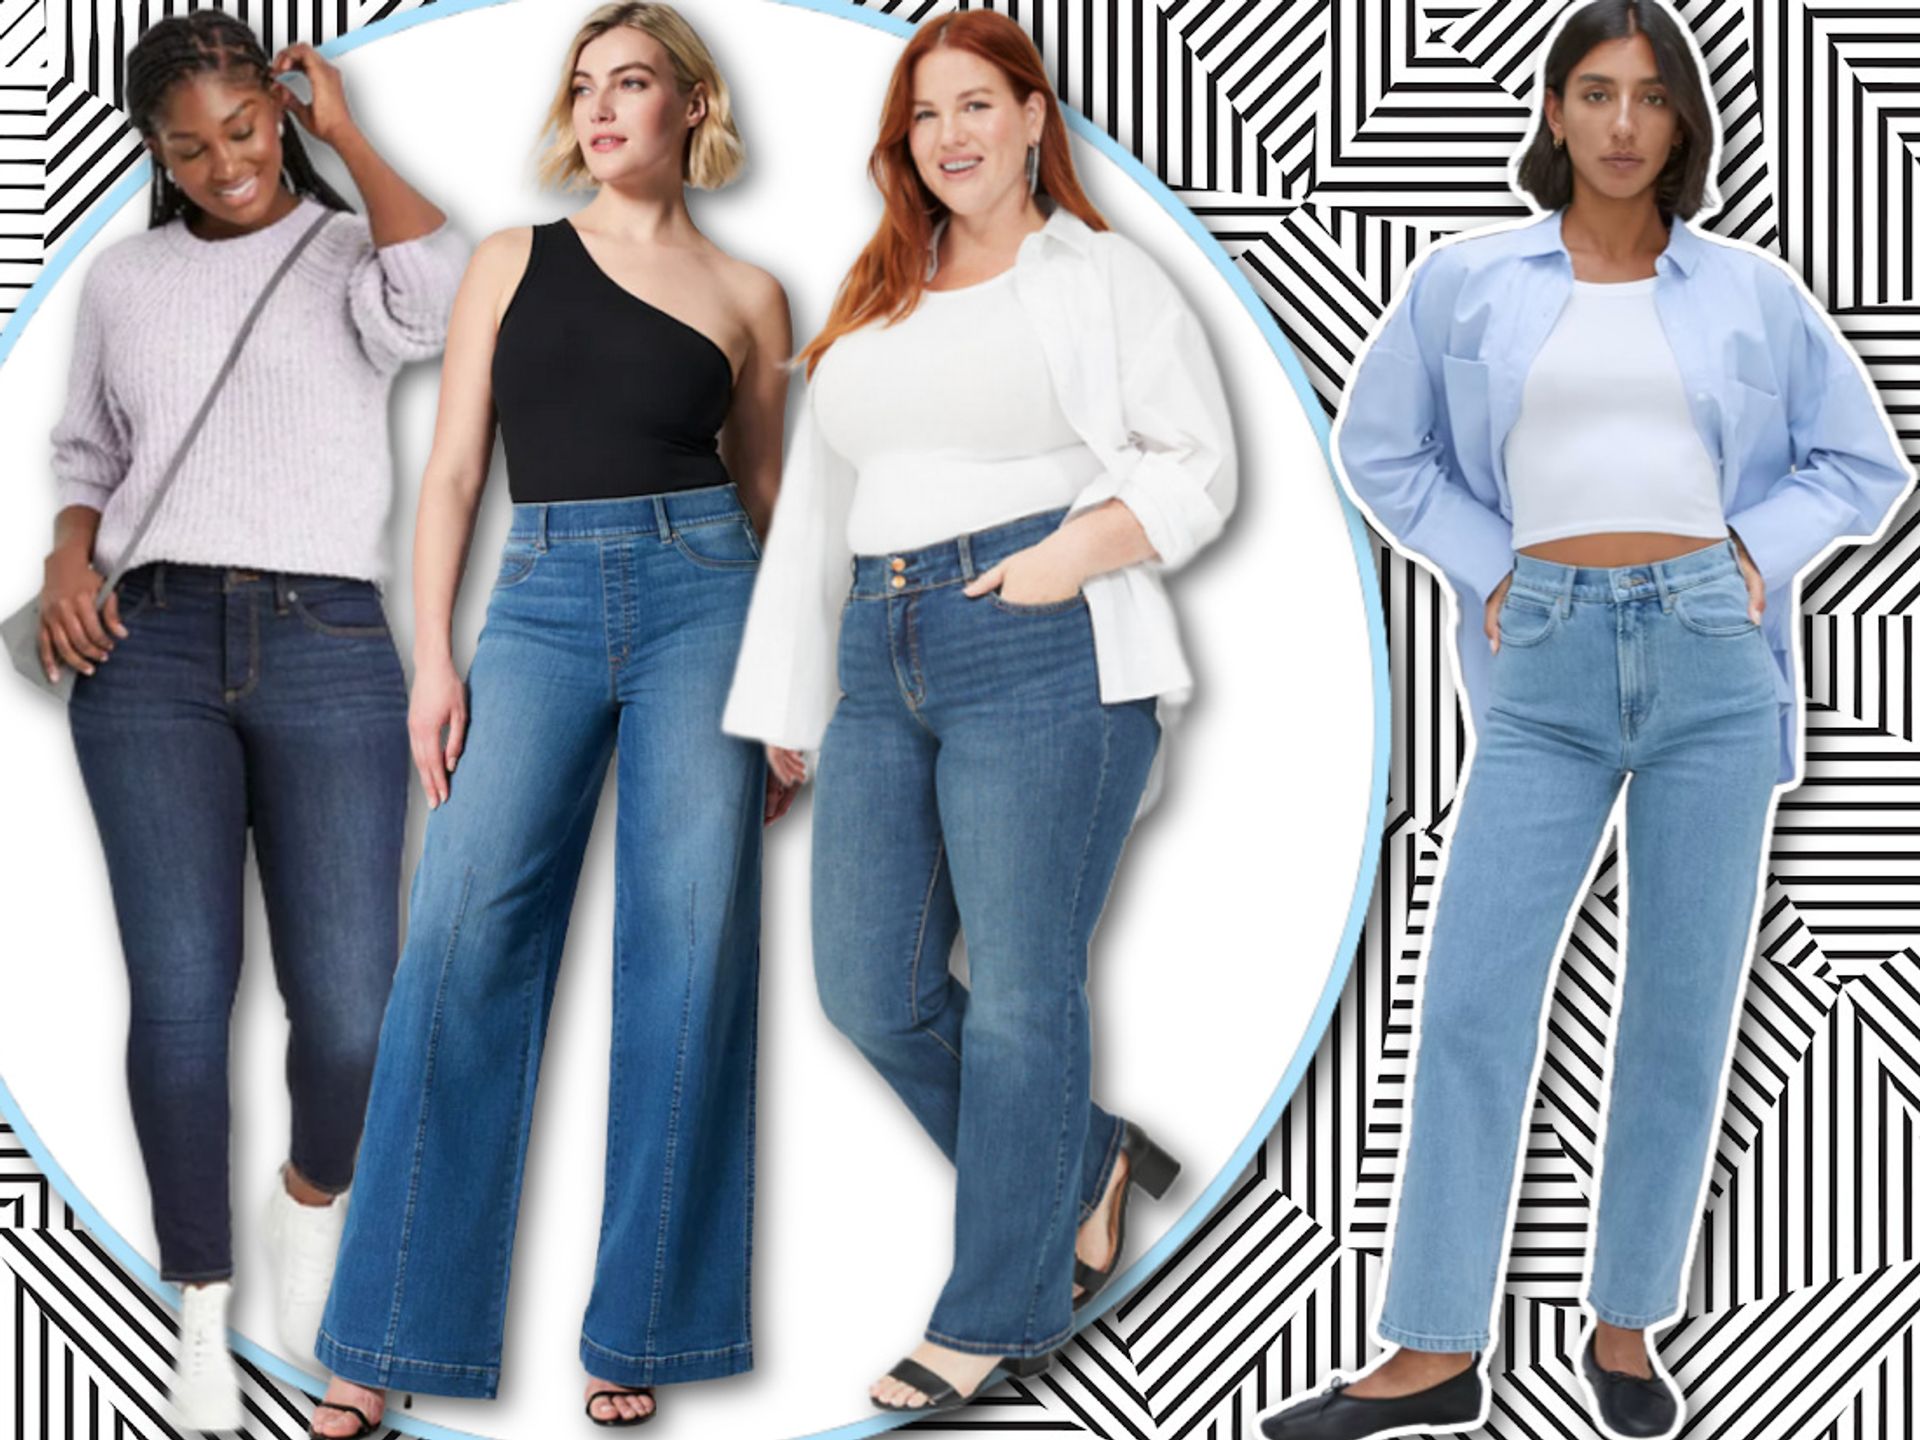 Plus sized models don't have big bellies. Have you noticed?